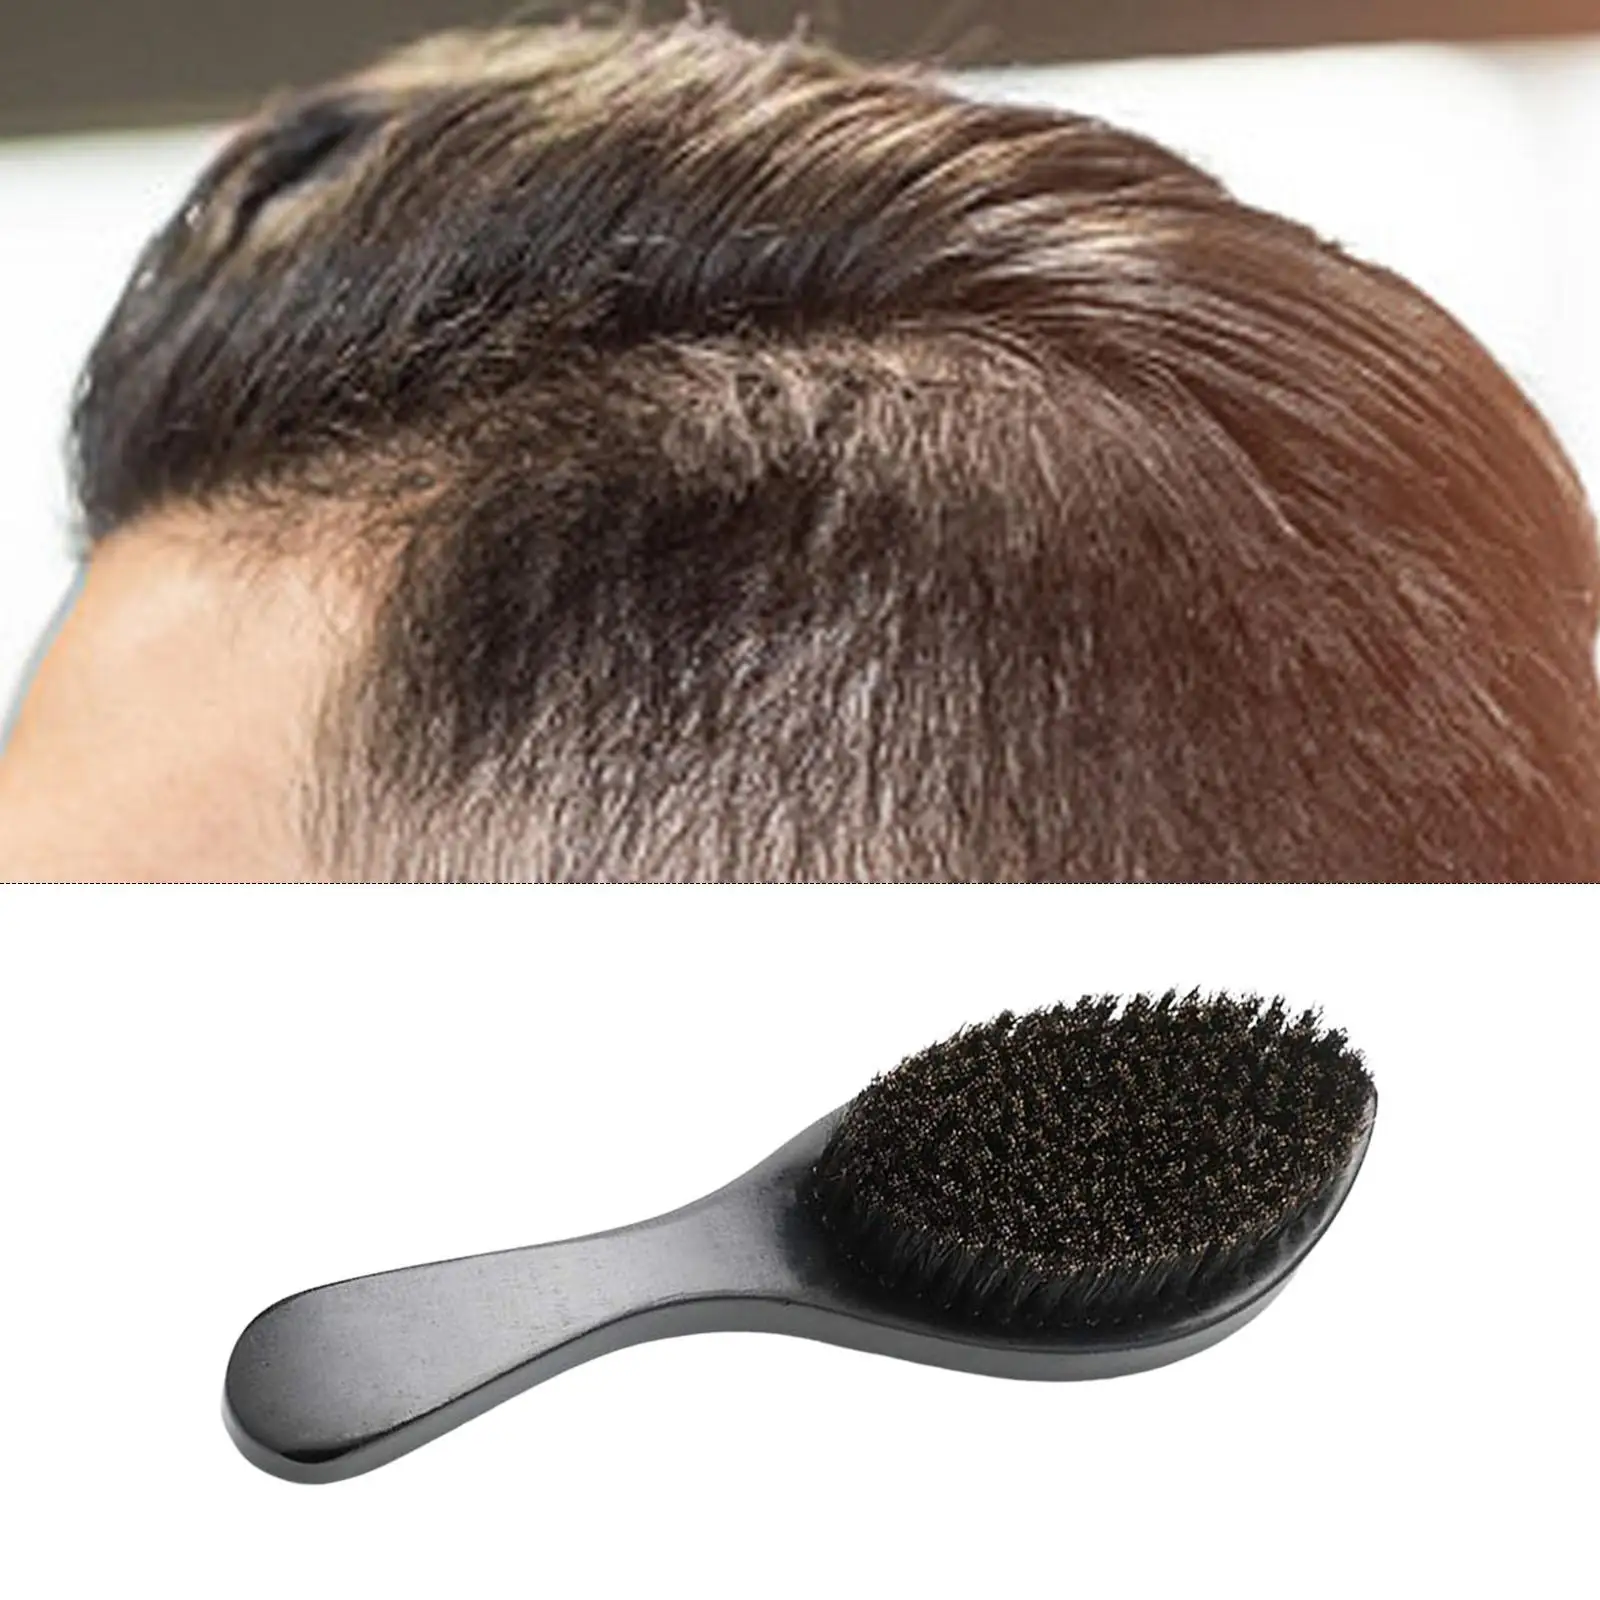 Unique Boar Bristle Beard Brush Soft Hair Styling Comfort Durable Wooden Styling Comb Grooming Tool